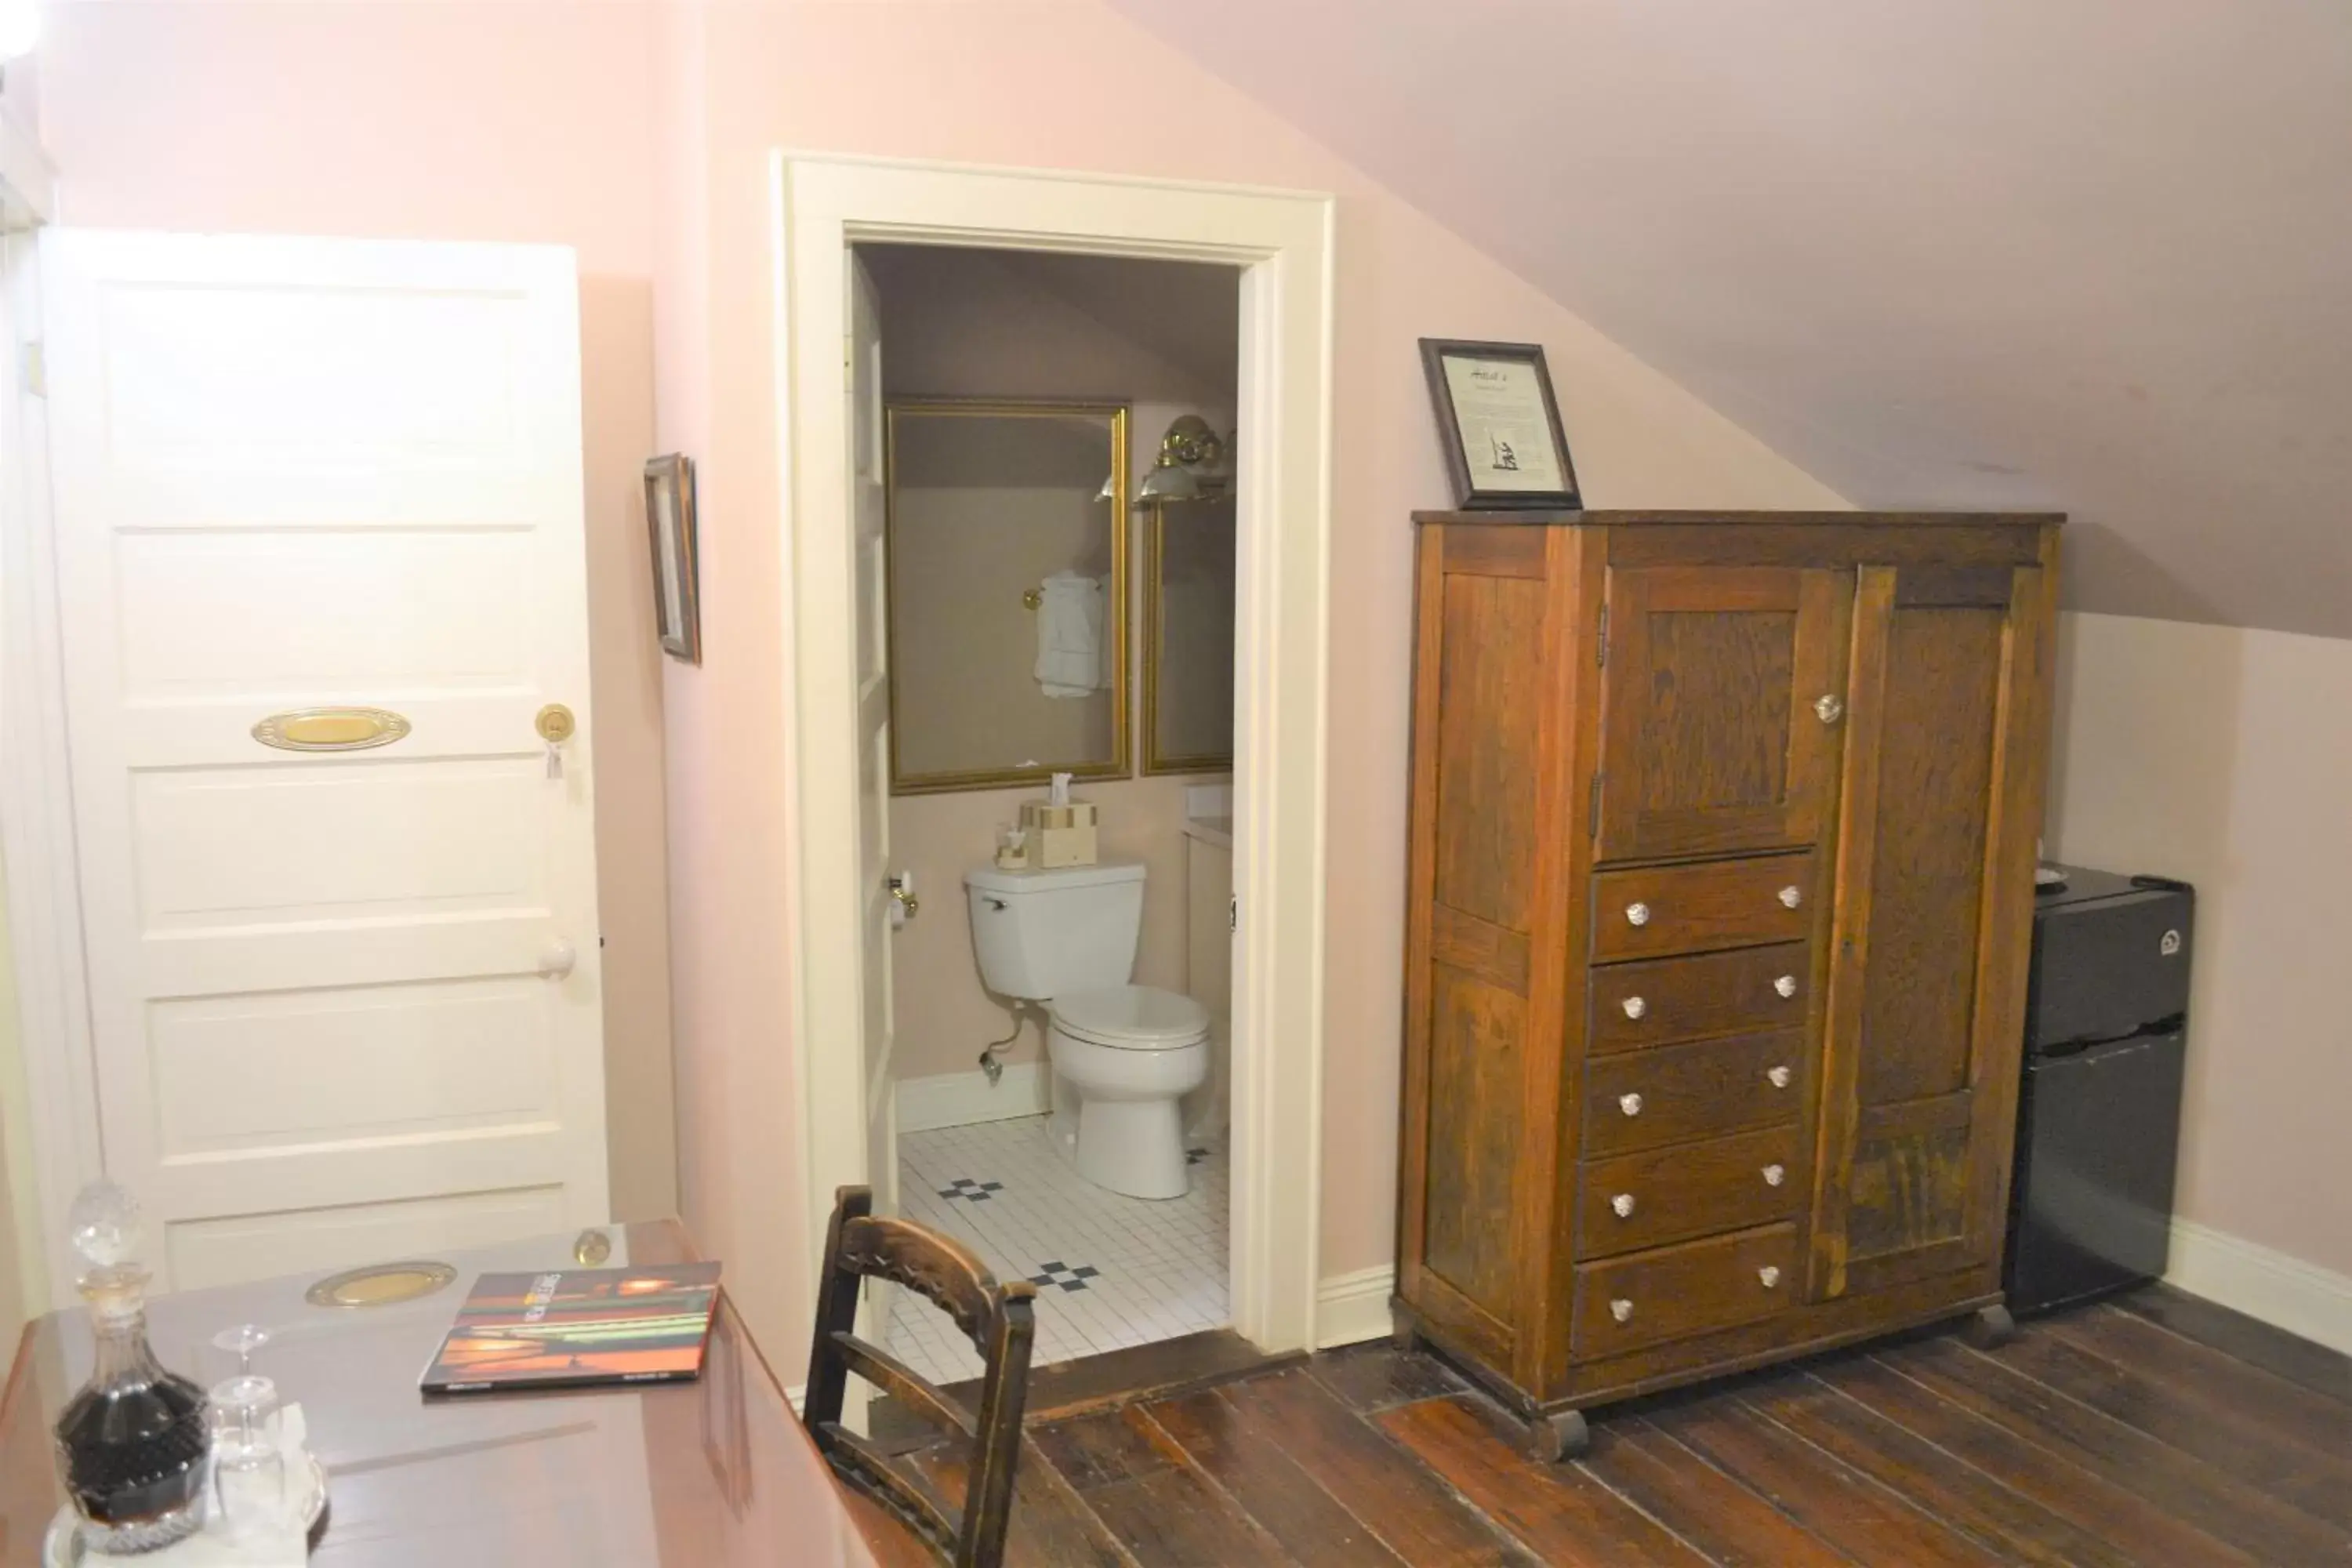 Toilet, Bathroom in Edgar Degas House Historic Home and Museum